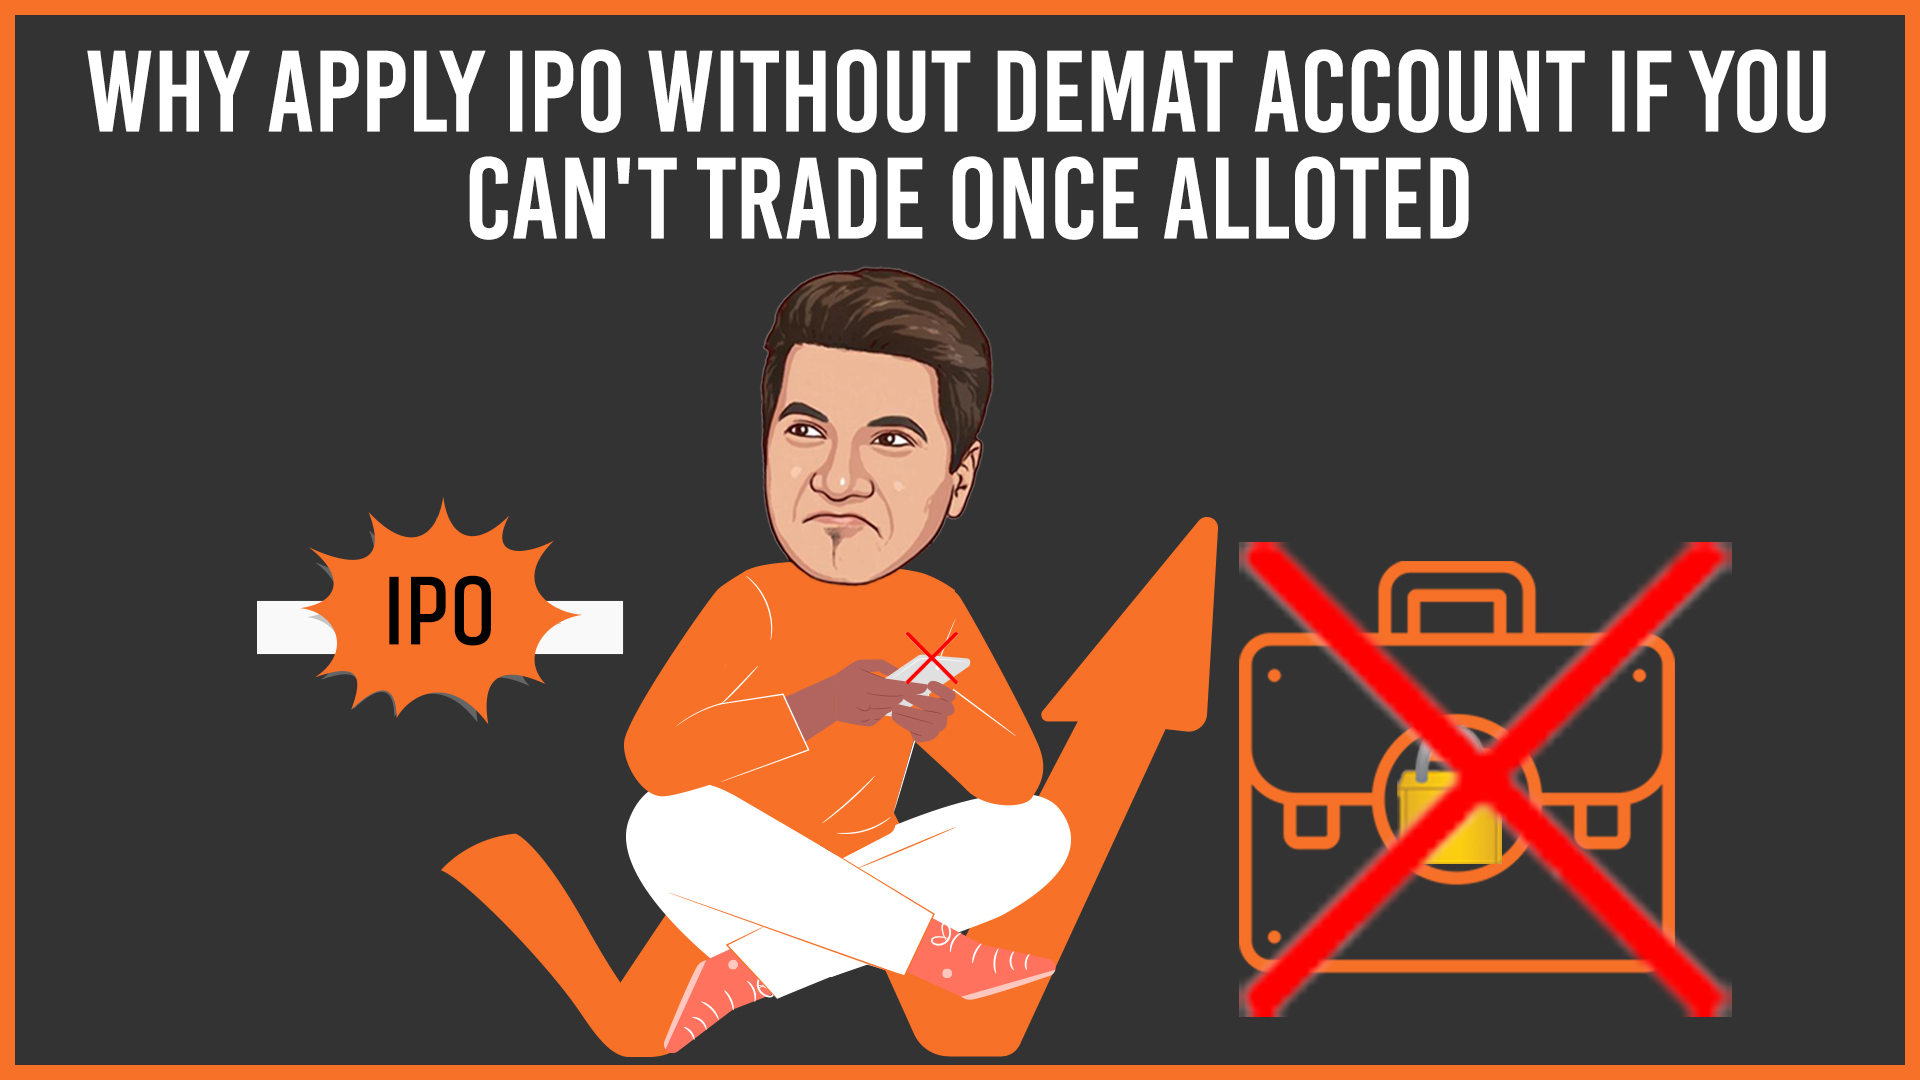 Can I Buy IPO Without Demat Account?